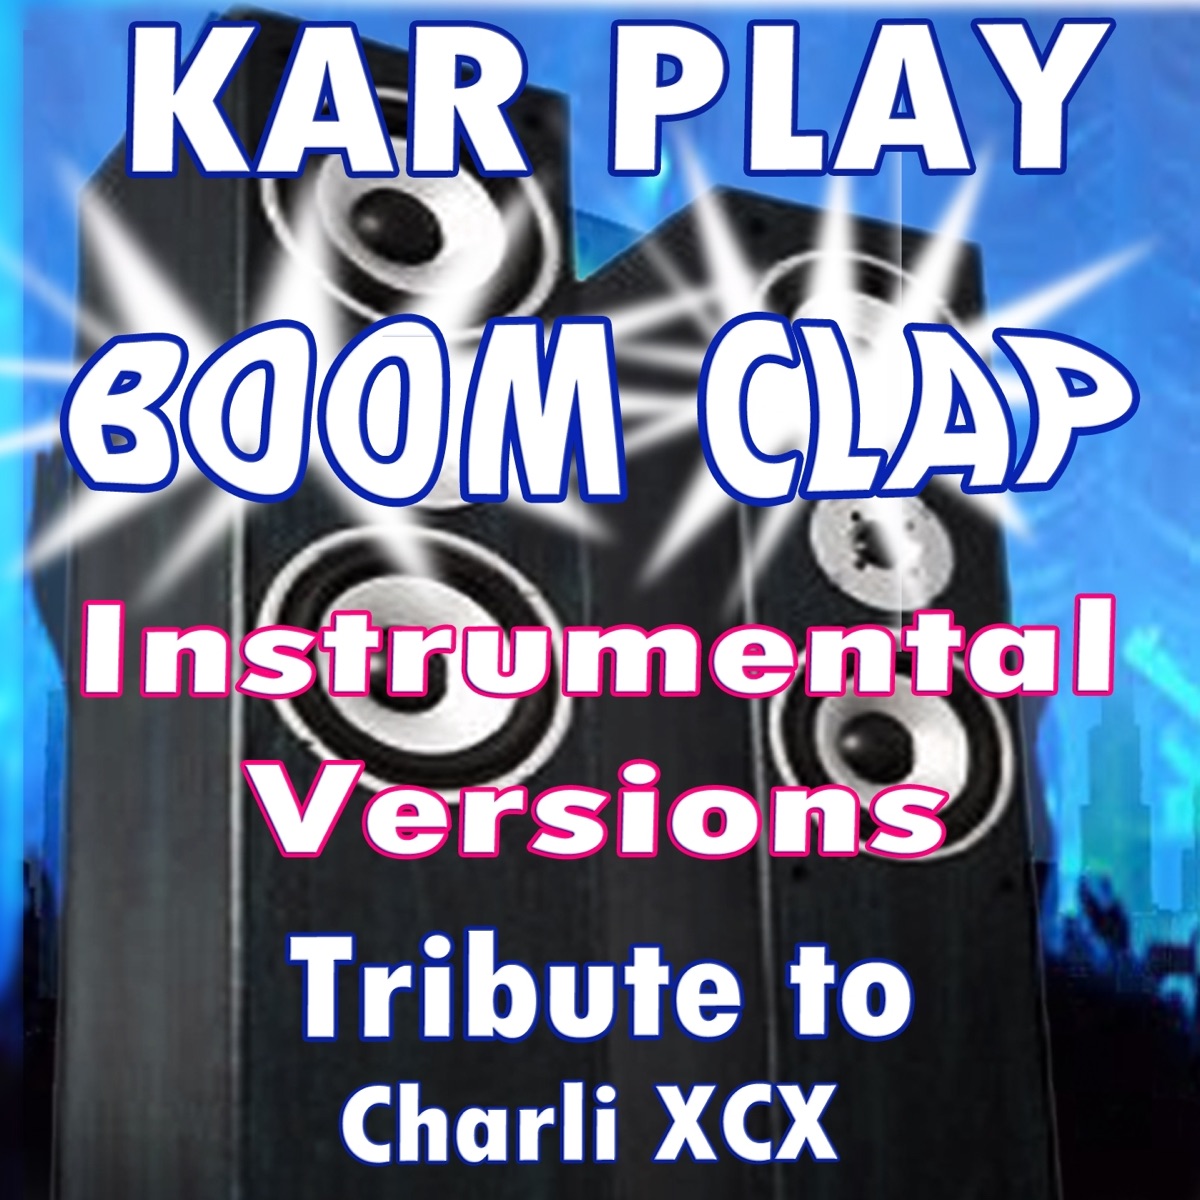 Roar - Tribute to Katy Perry (Instrumental Version) - song and